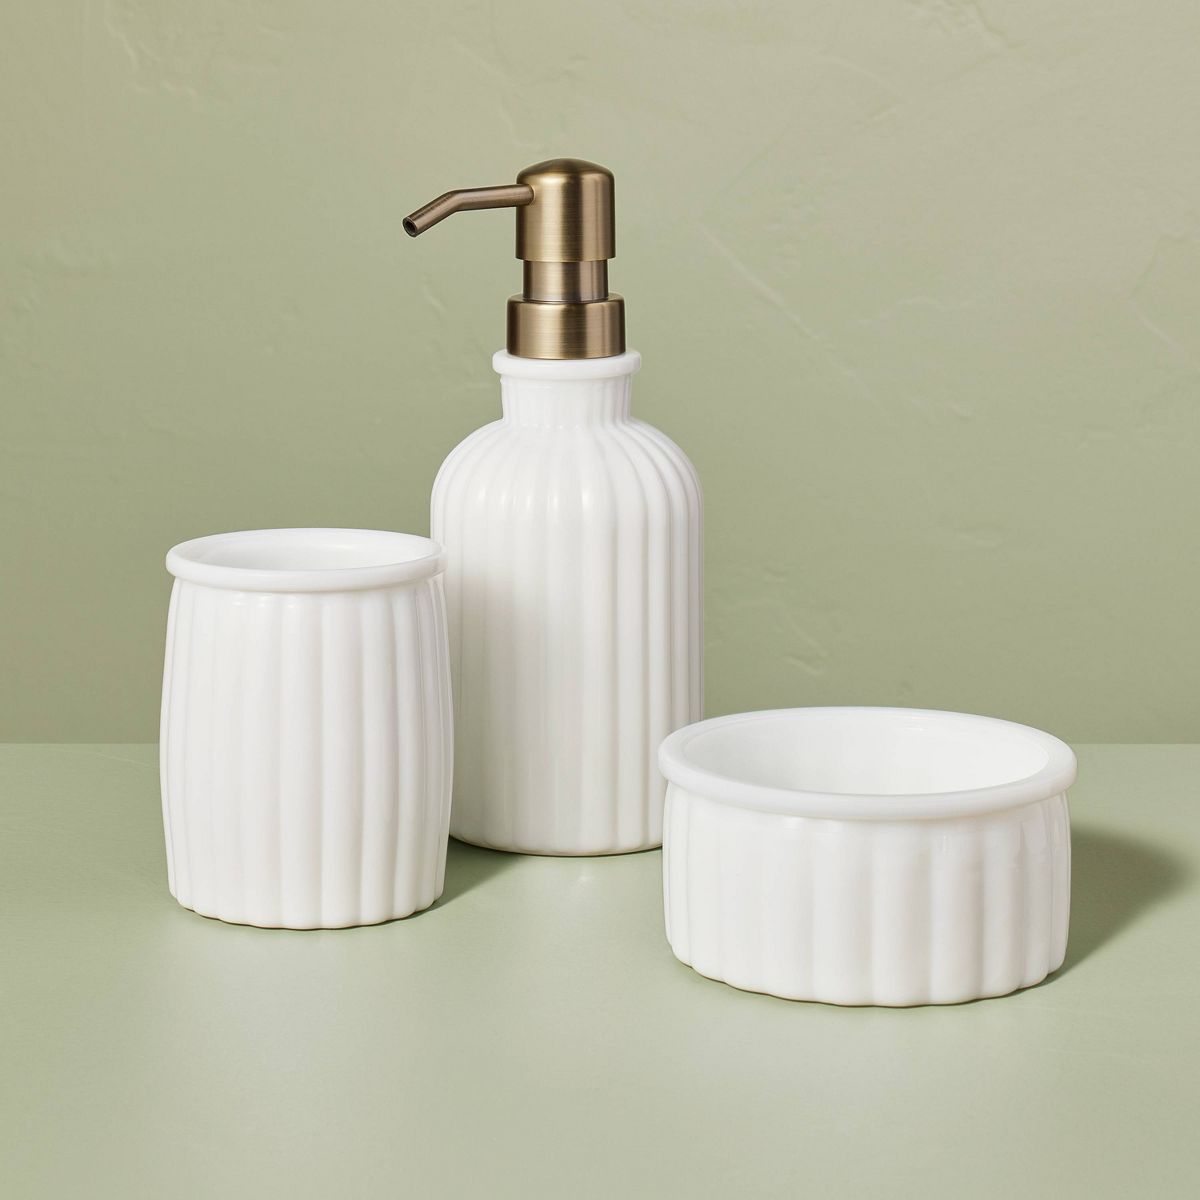 Ribbed Milk Glass Bathroom Tumbler White - Hearth & Hand™ with Magnolia | Target